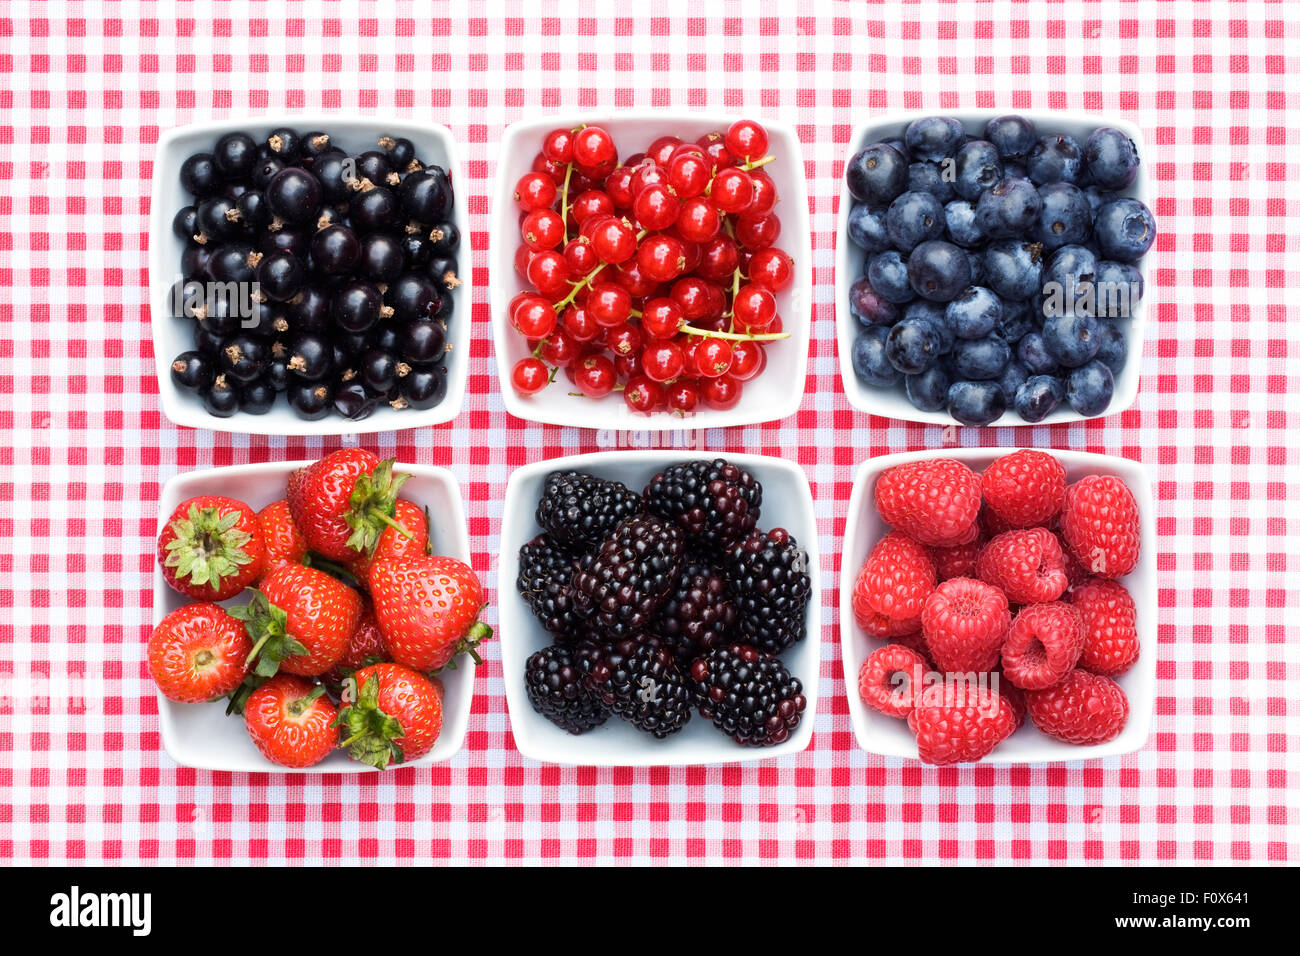 Redcurrants, Blackcurrants, Blackberries, Strawberries, Raspberries and Blueberries in white bowls on a checked background. Stock Photo